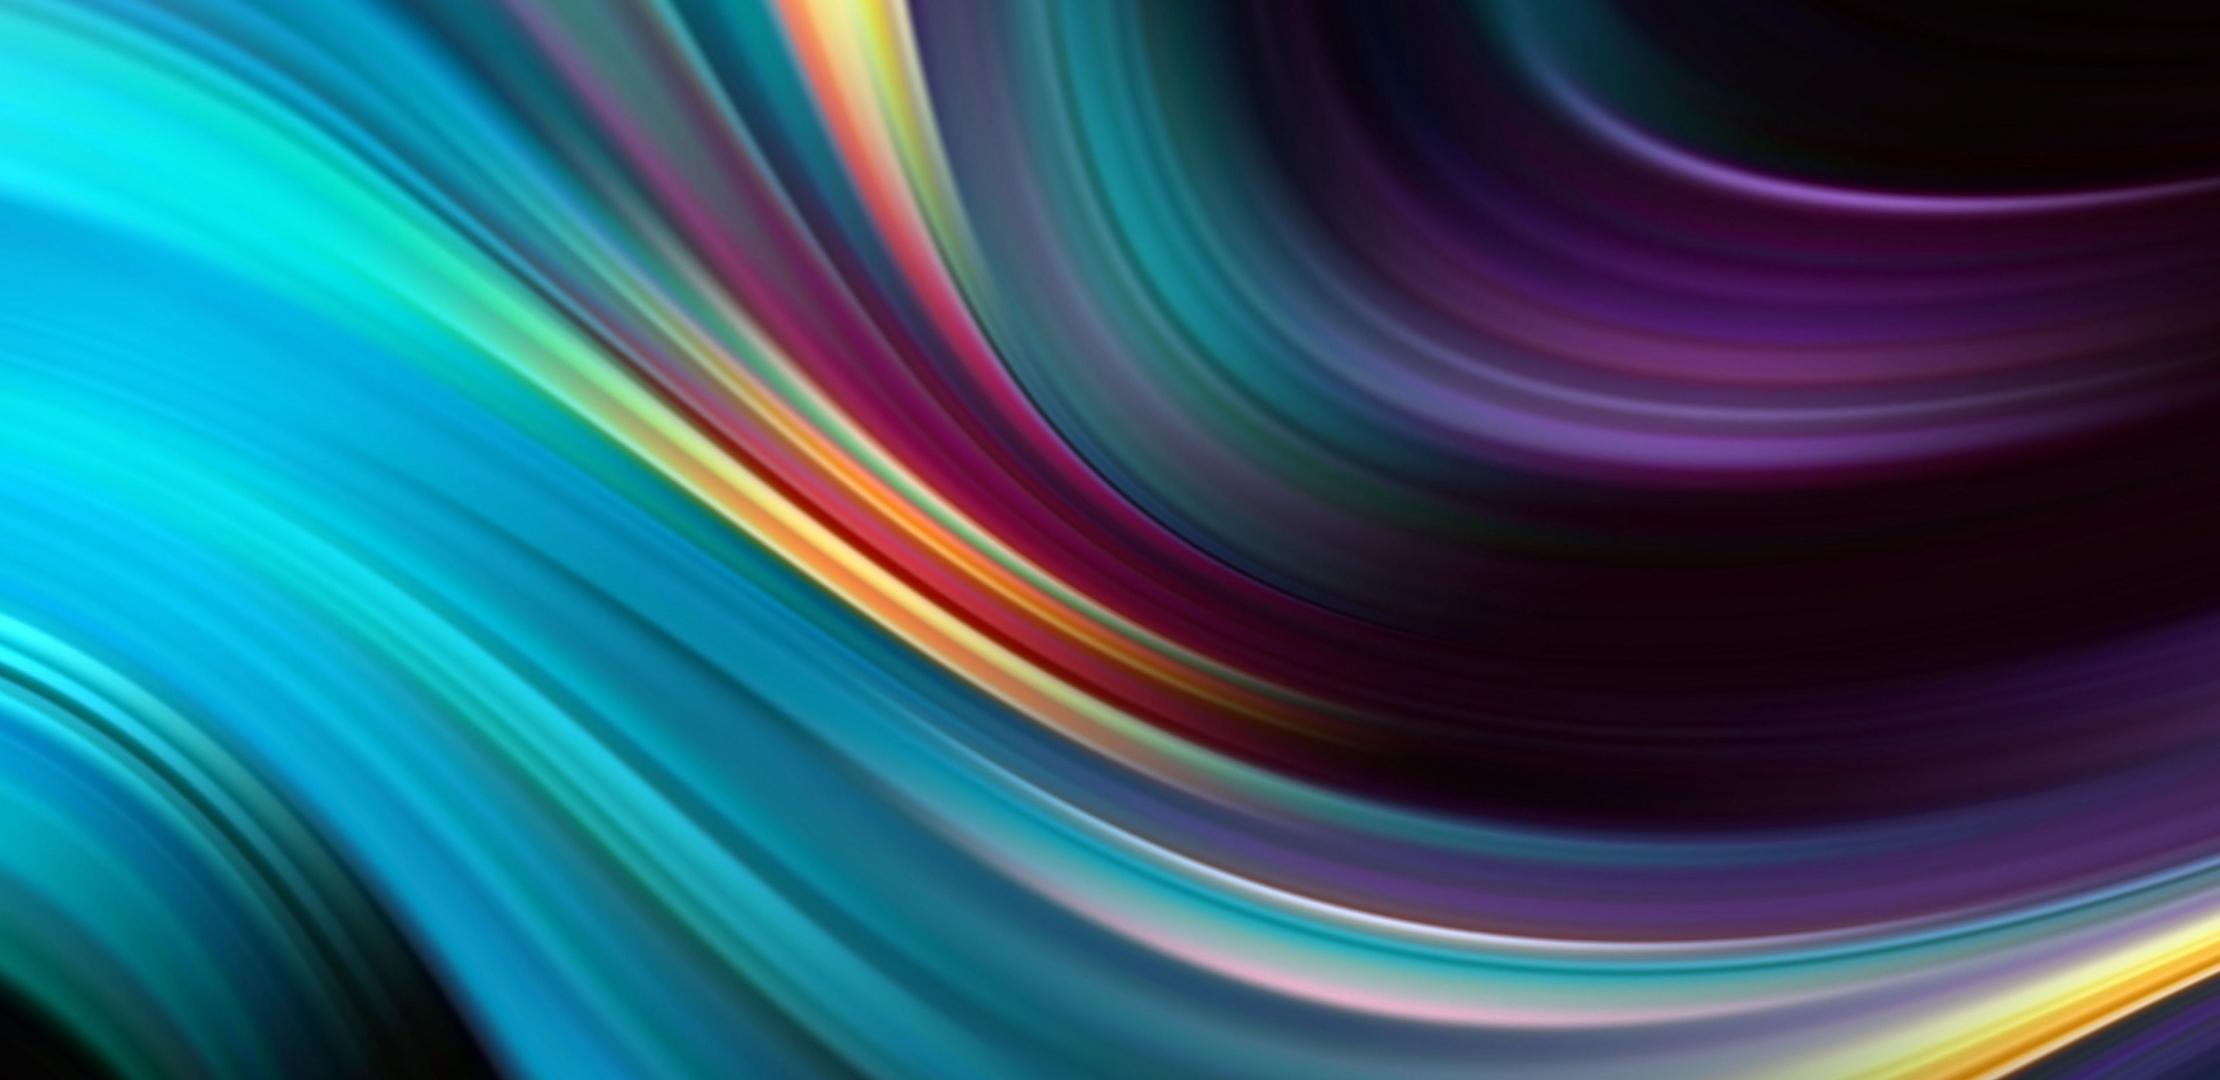 Abstract 3D Wave Colorful Design Wallpaper 3840x2400